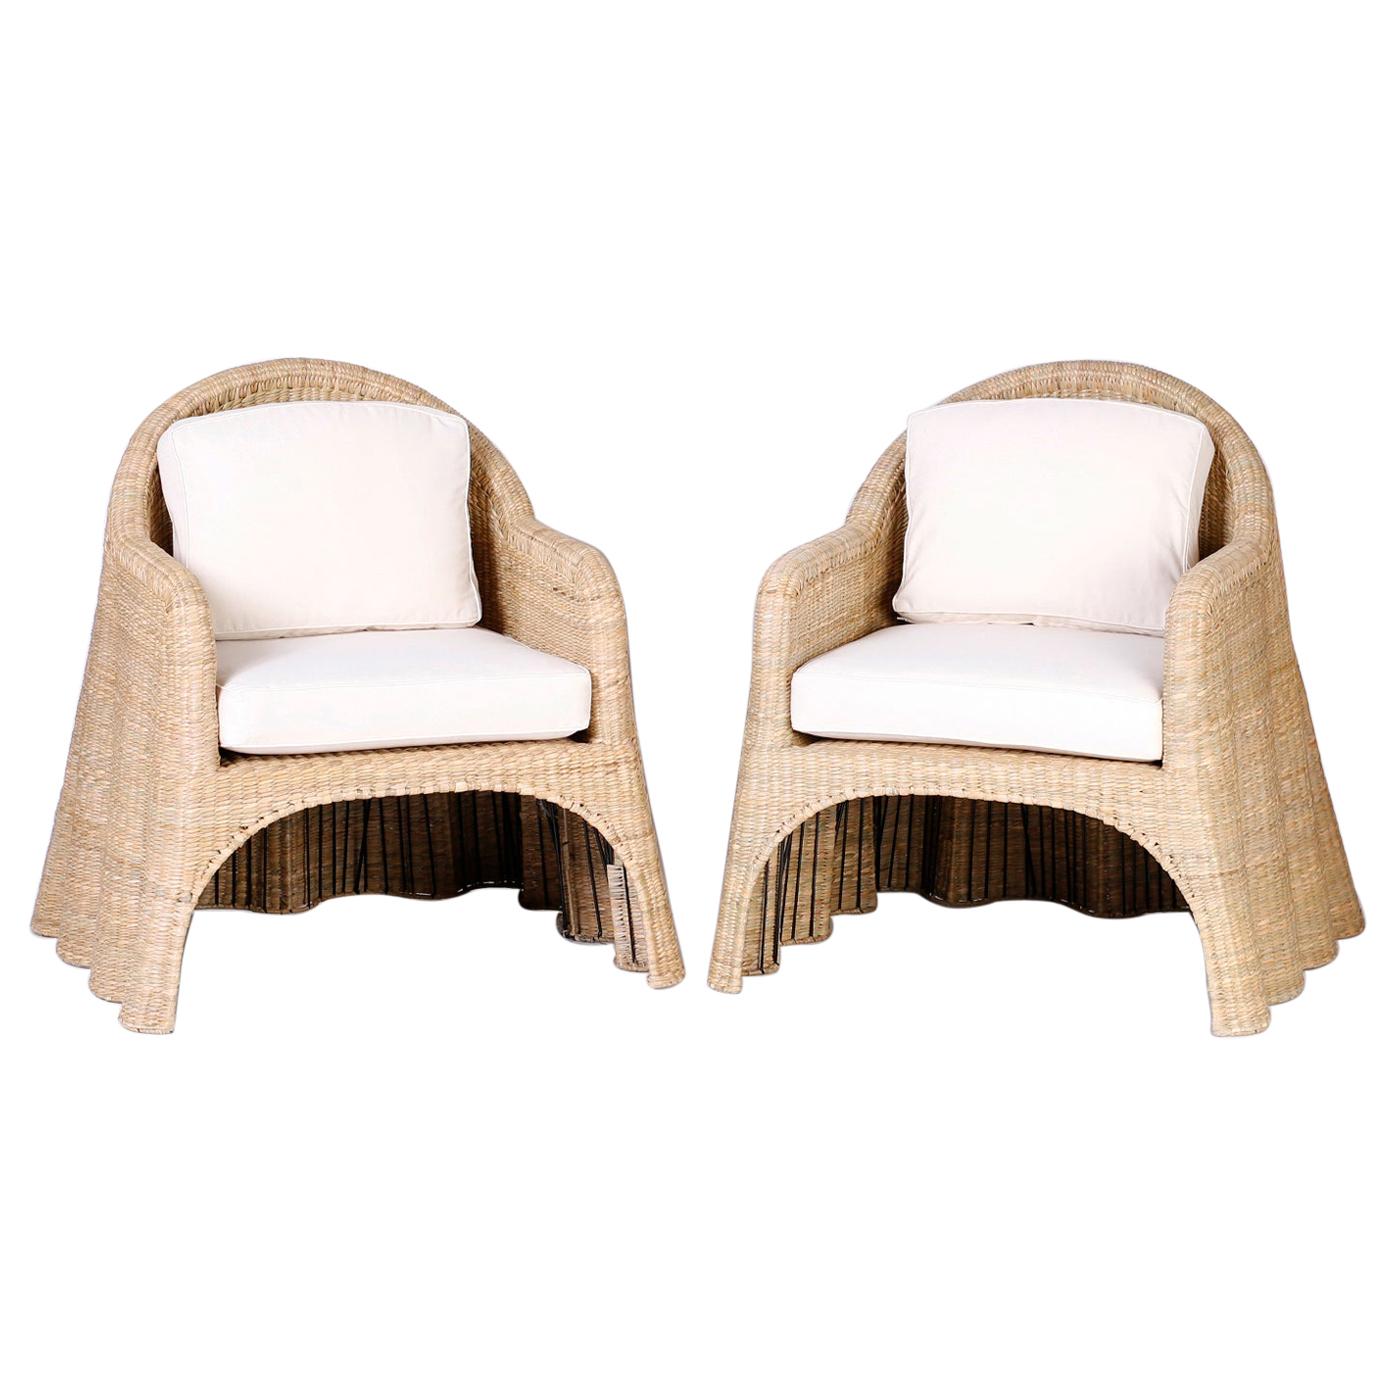 Wicker Drapery Ghost Armchairs with Open Fronts, Priced Individually